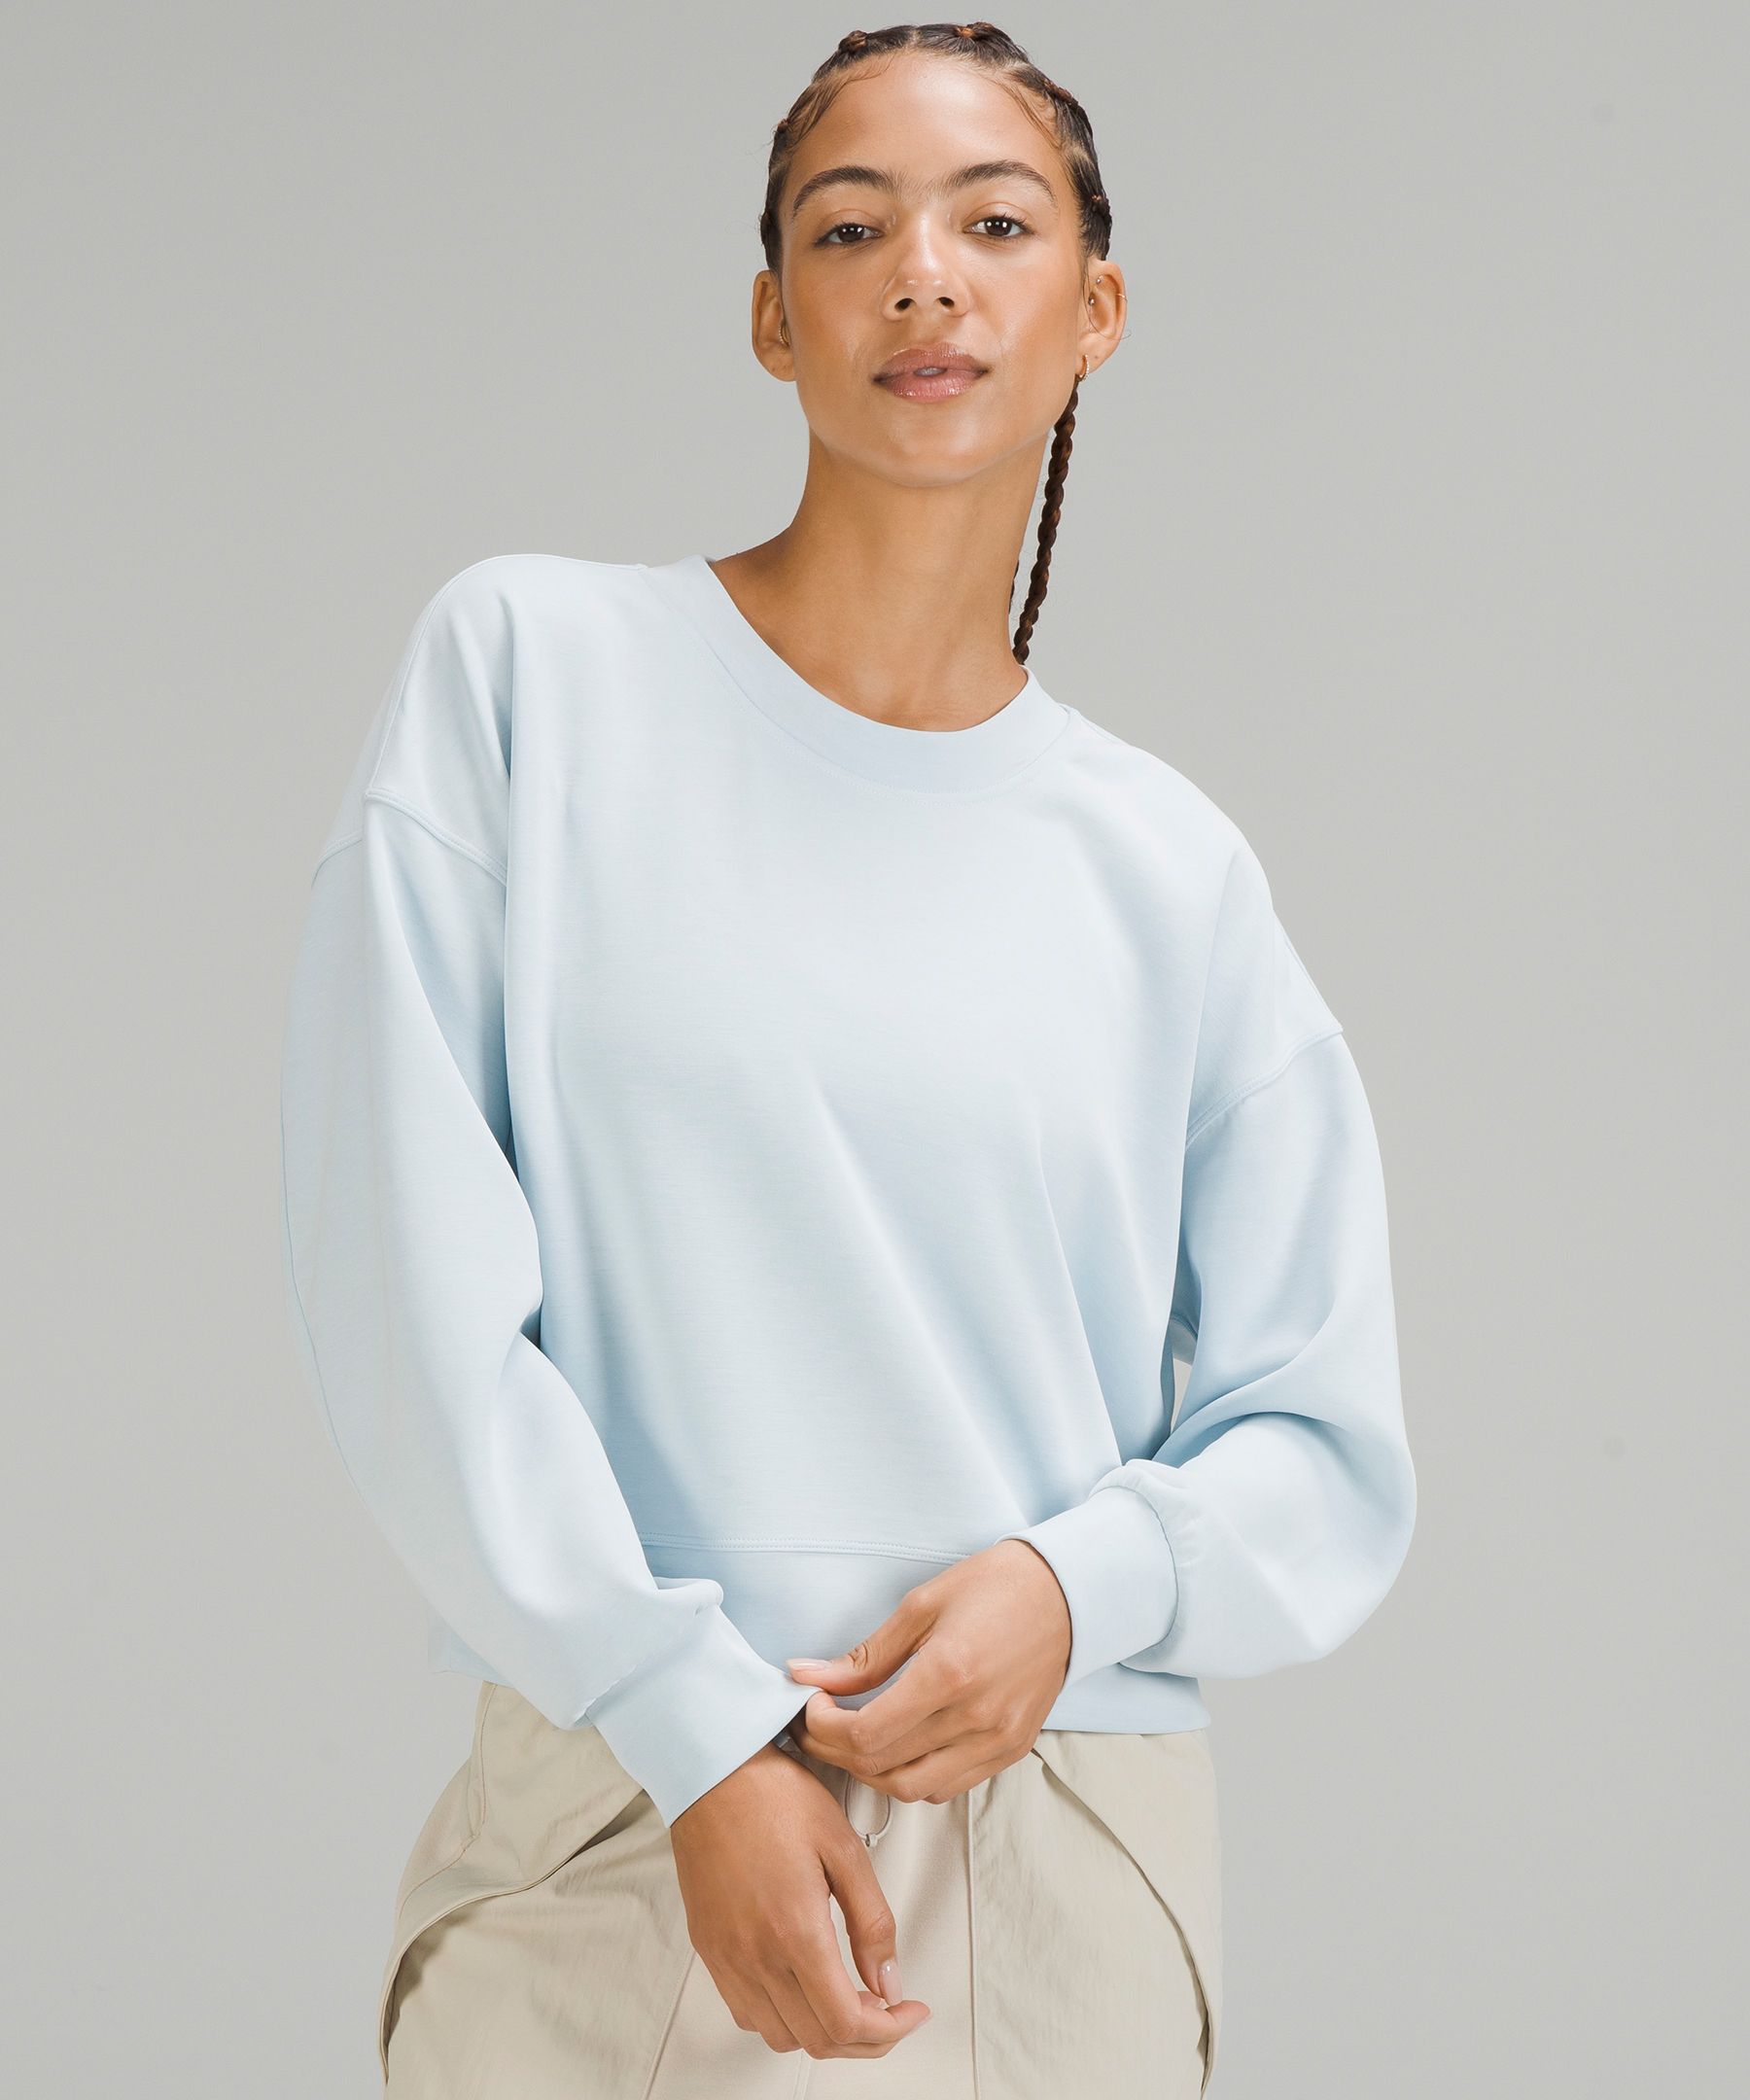 Lululemon NWT Perfectly Oversized Cropped Crew Softstreme - Pink Blossom  Size 14 - $102 (13% Off Retail) New With Tags - From A